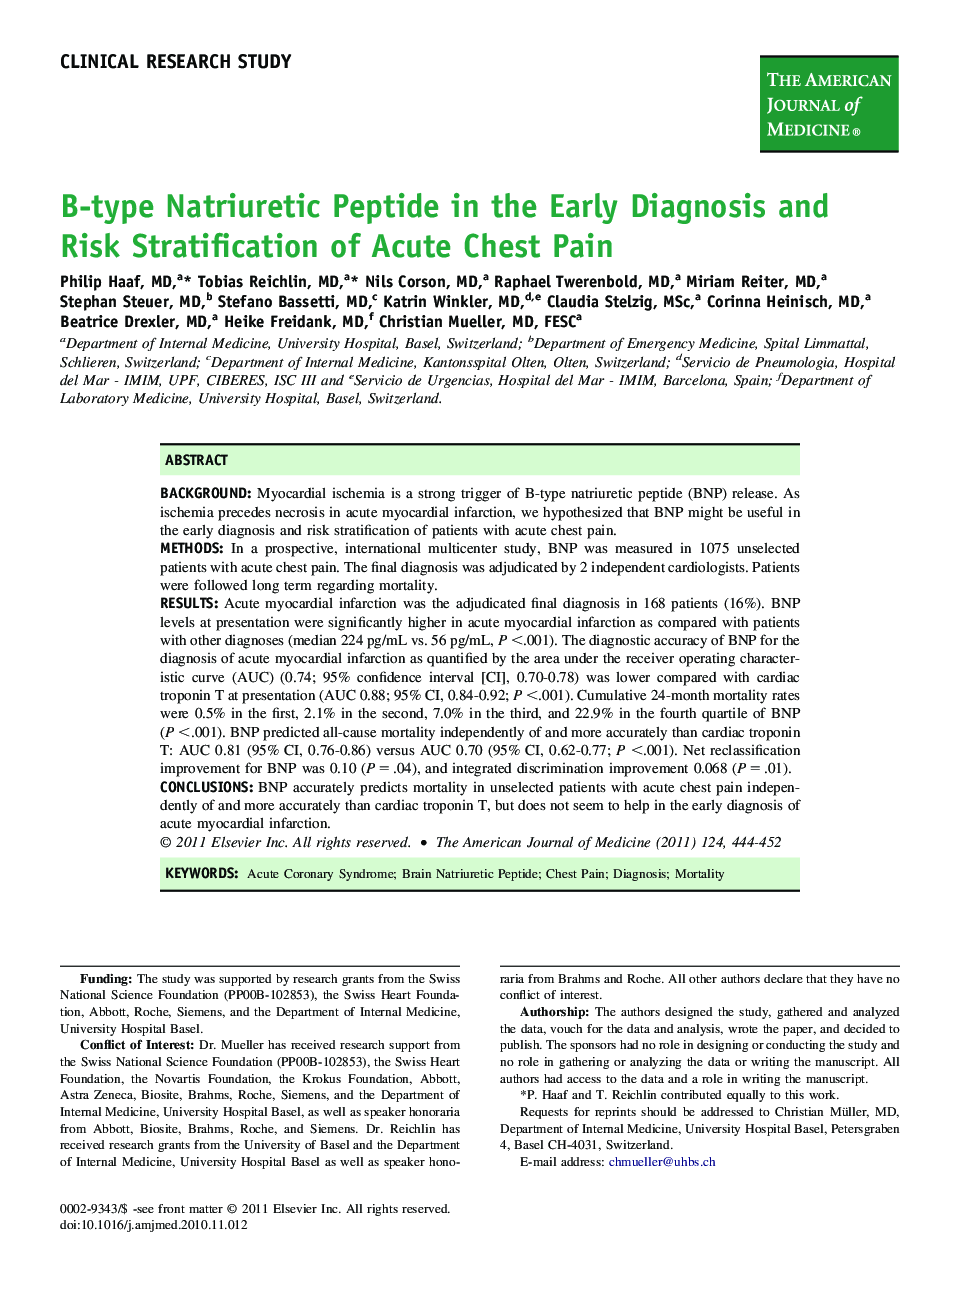 B-type Natriuretic Peptide in the Early Diagnosis and Risk Stratification of Acute Chest Pain 